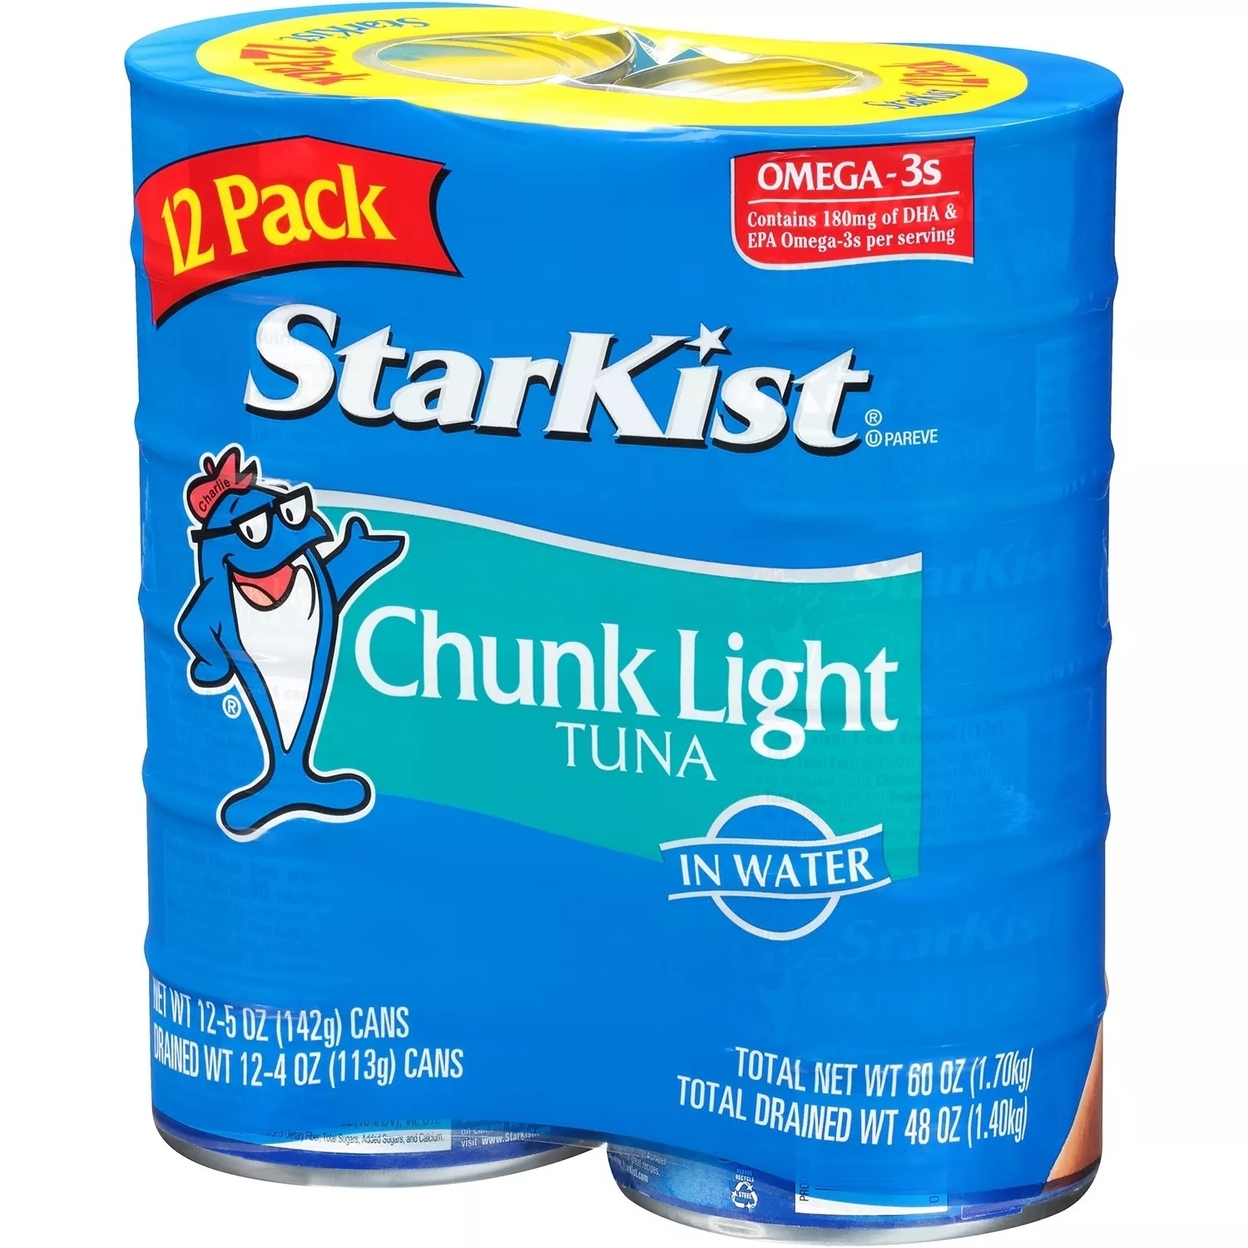 Starkist Chunk Light Tuna in Water 5 Ounce Can (Pack of 12) - image 2 of 5